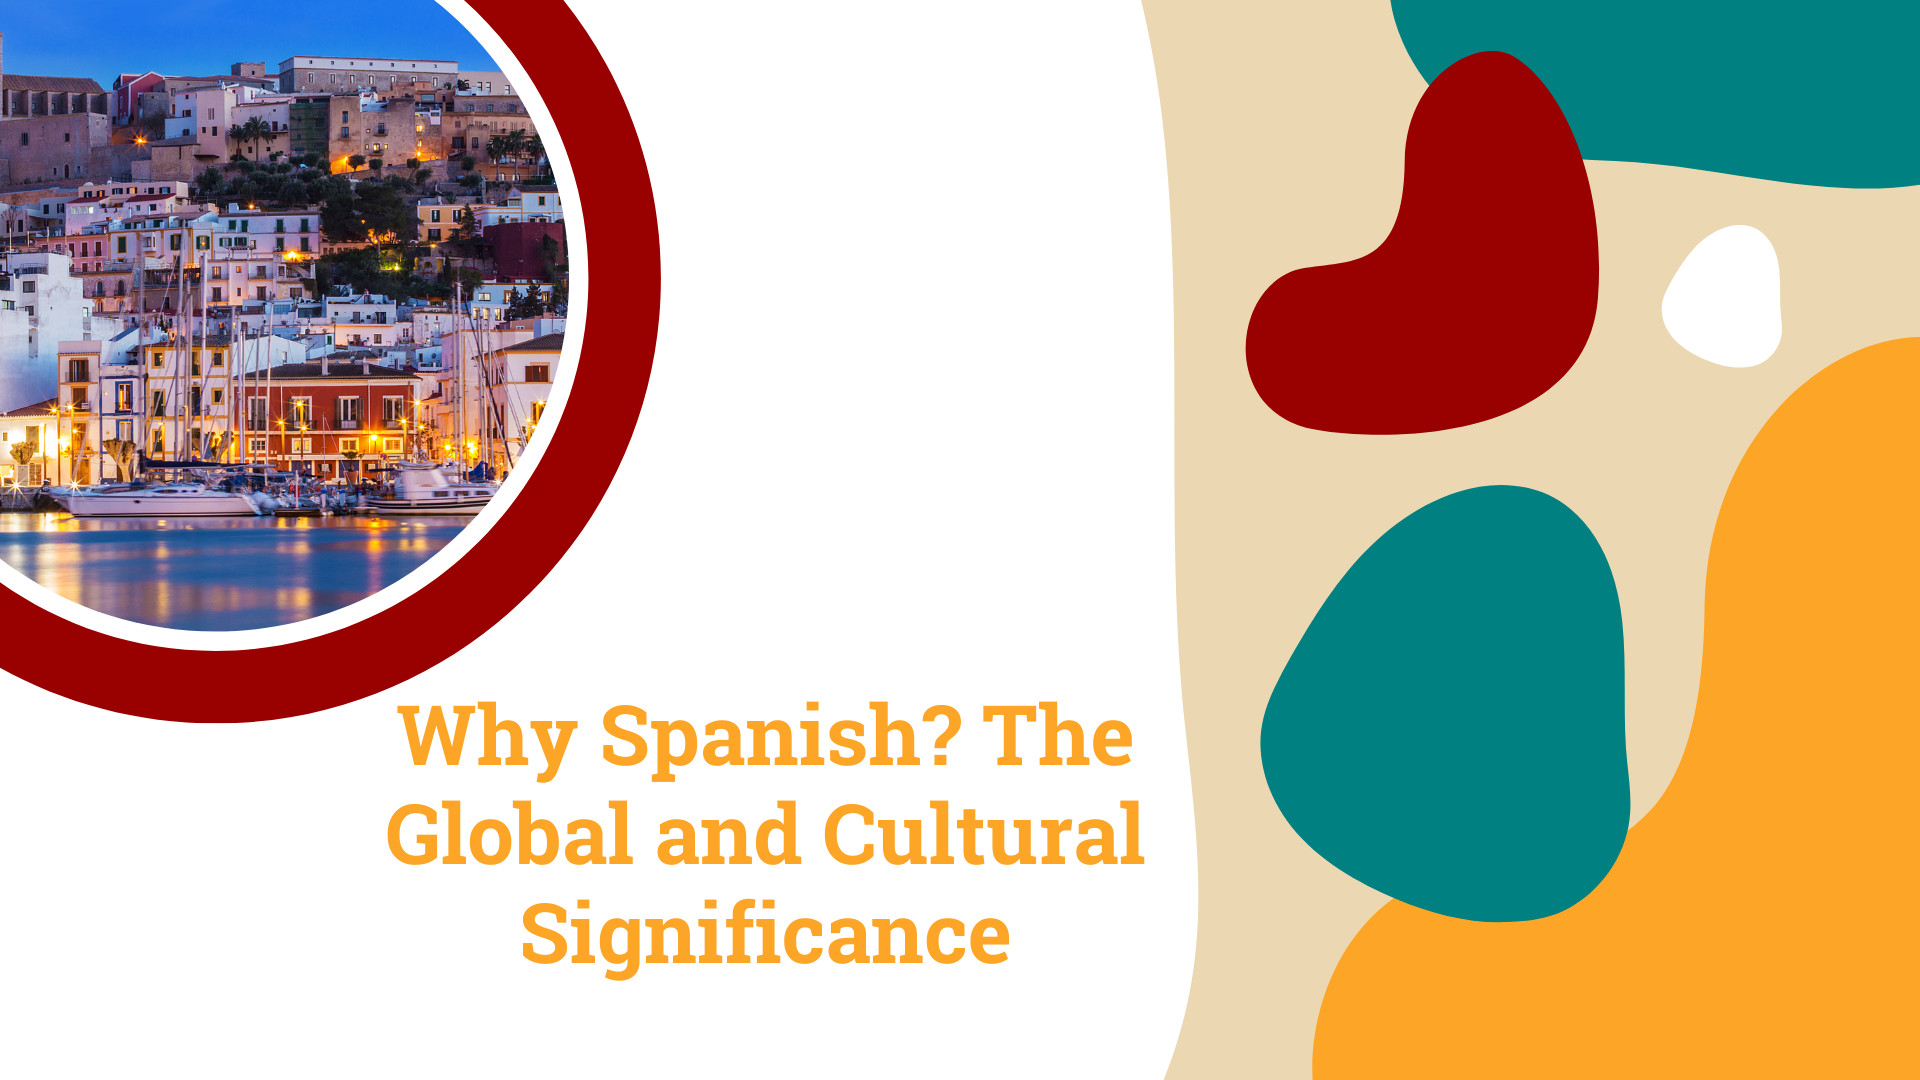 Why Spanish? The Global and Cultural Significance